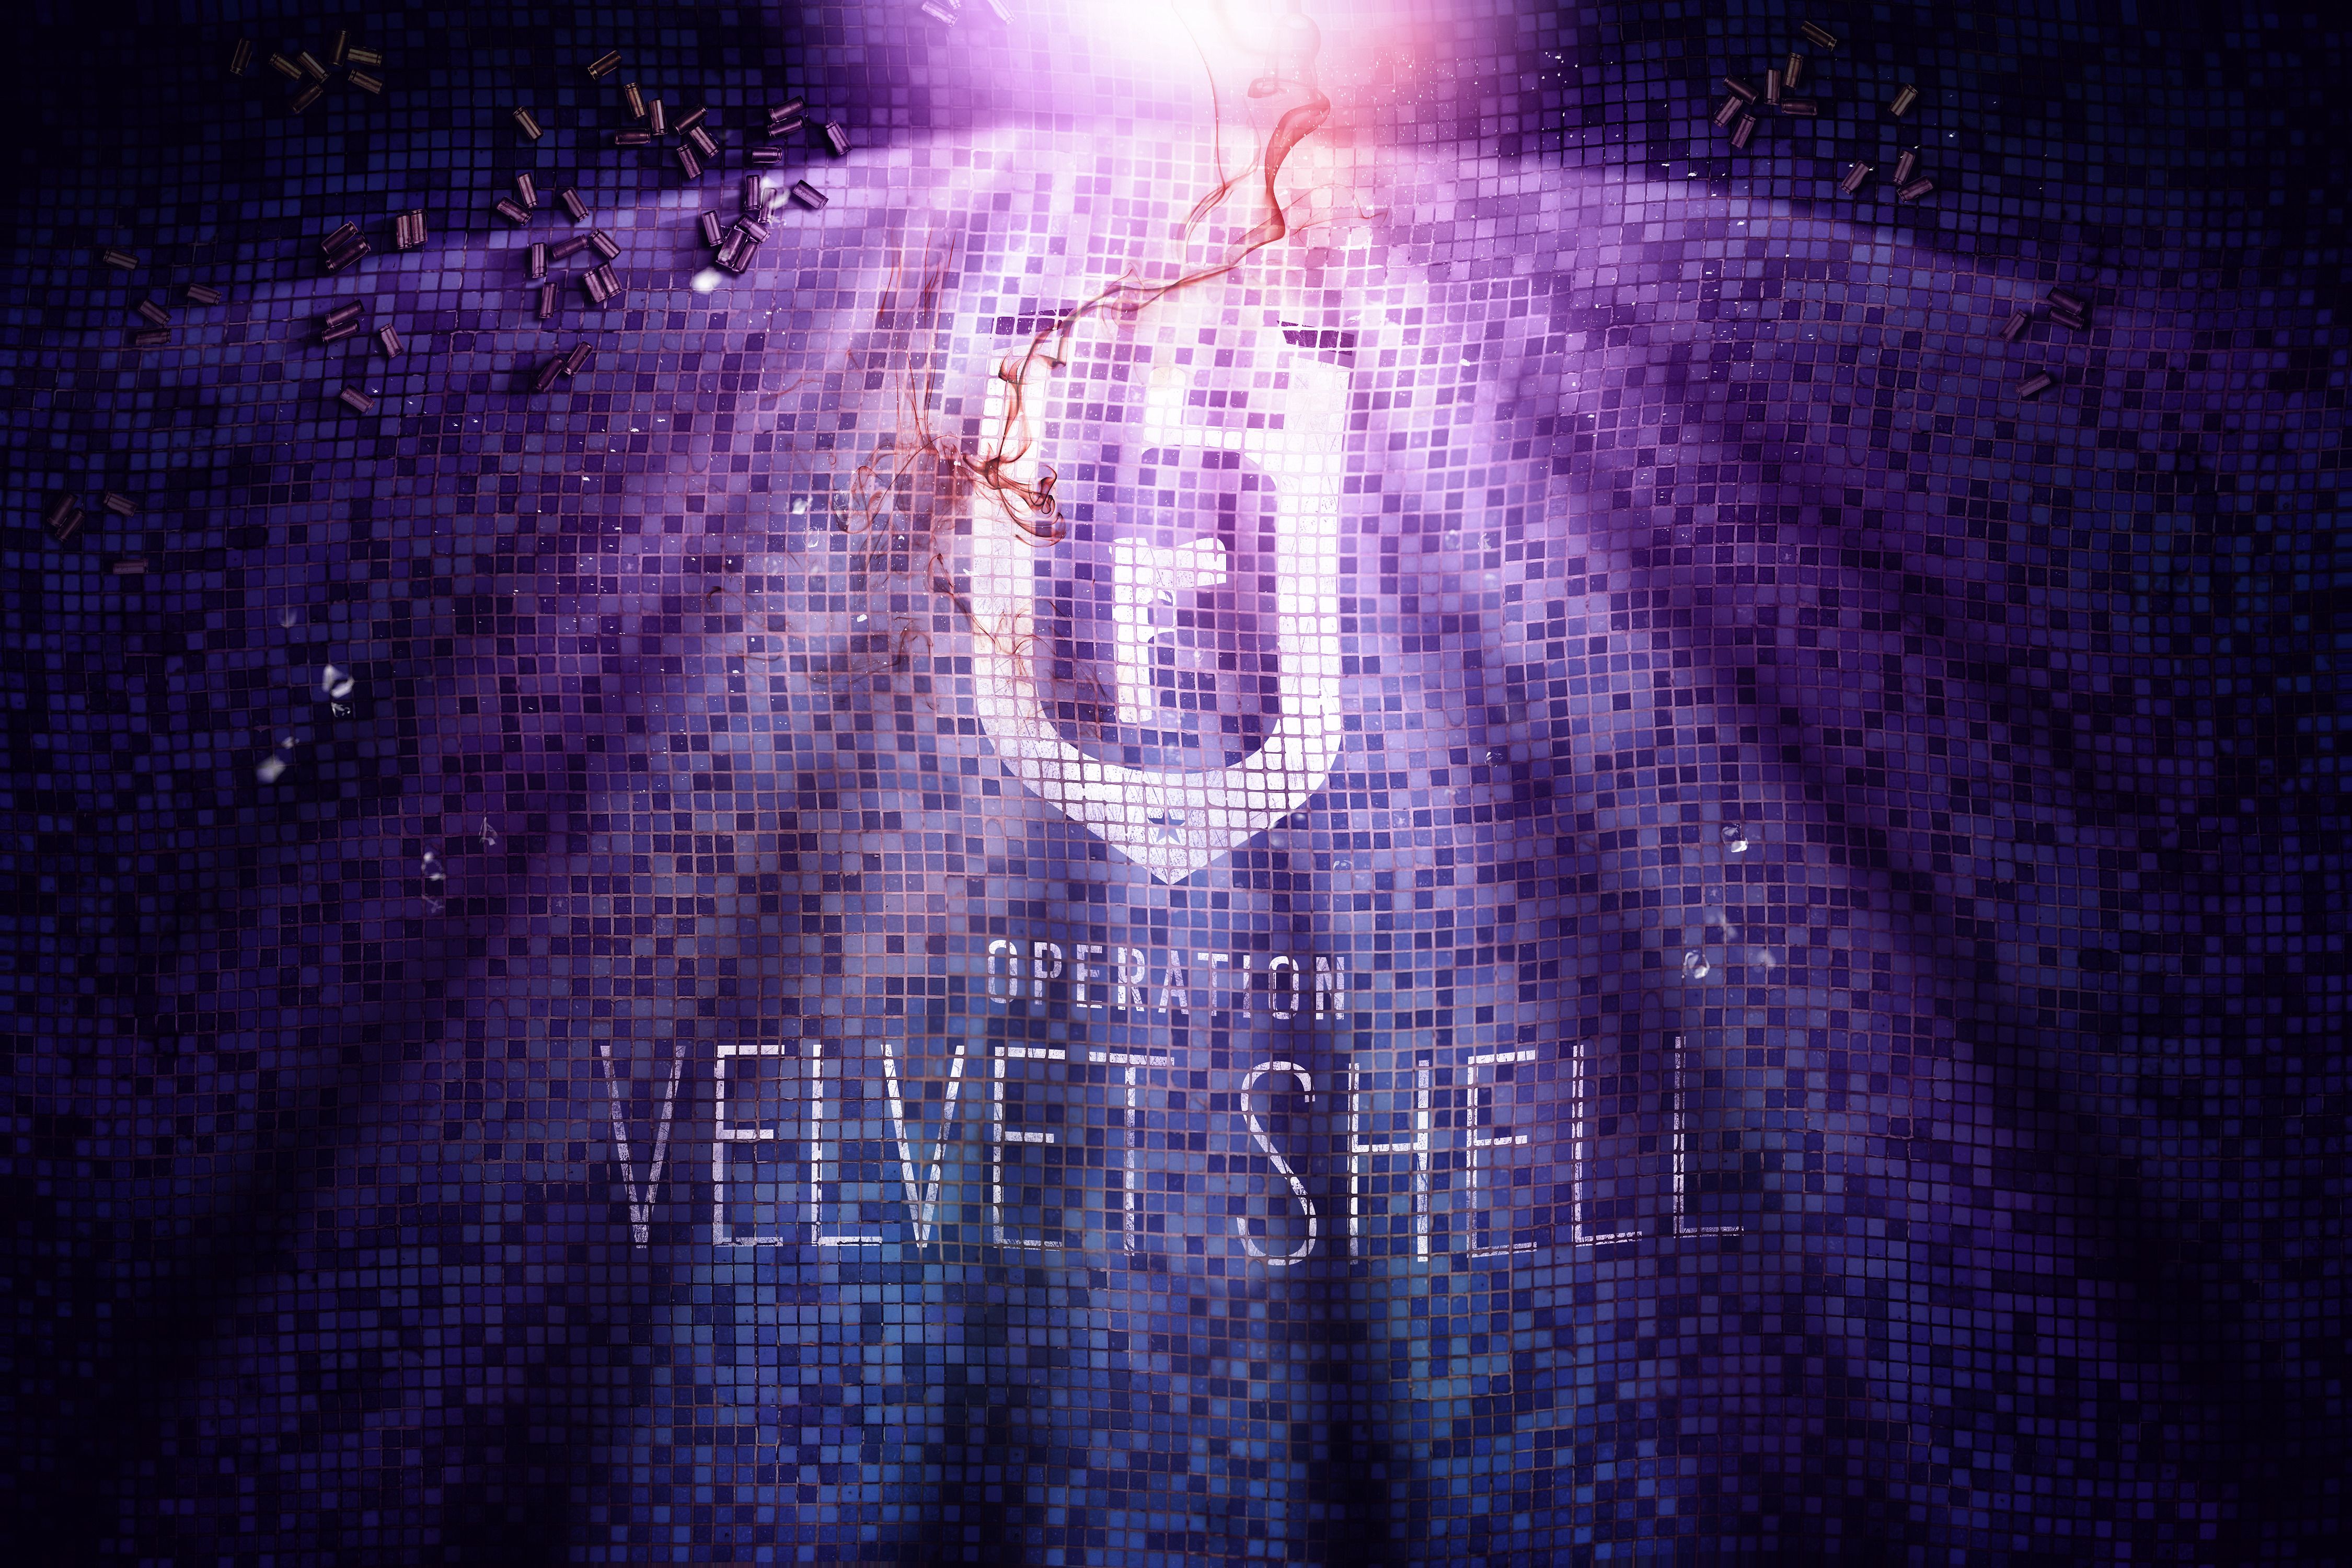 Rainbow Six Siege Year 2 S First Operation Is Called Velvet Shell New Map Gets Preview Trailer